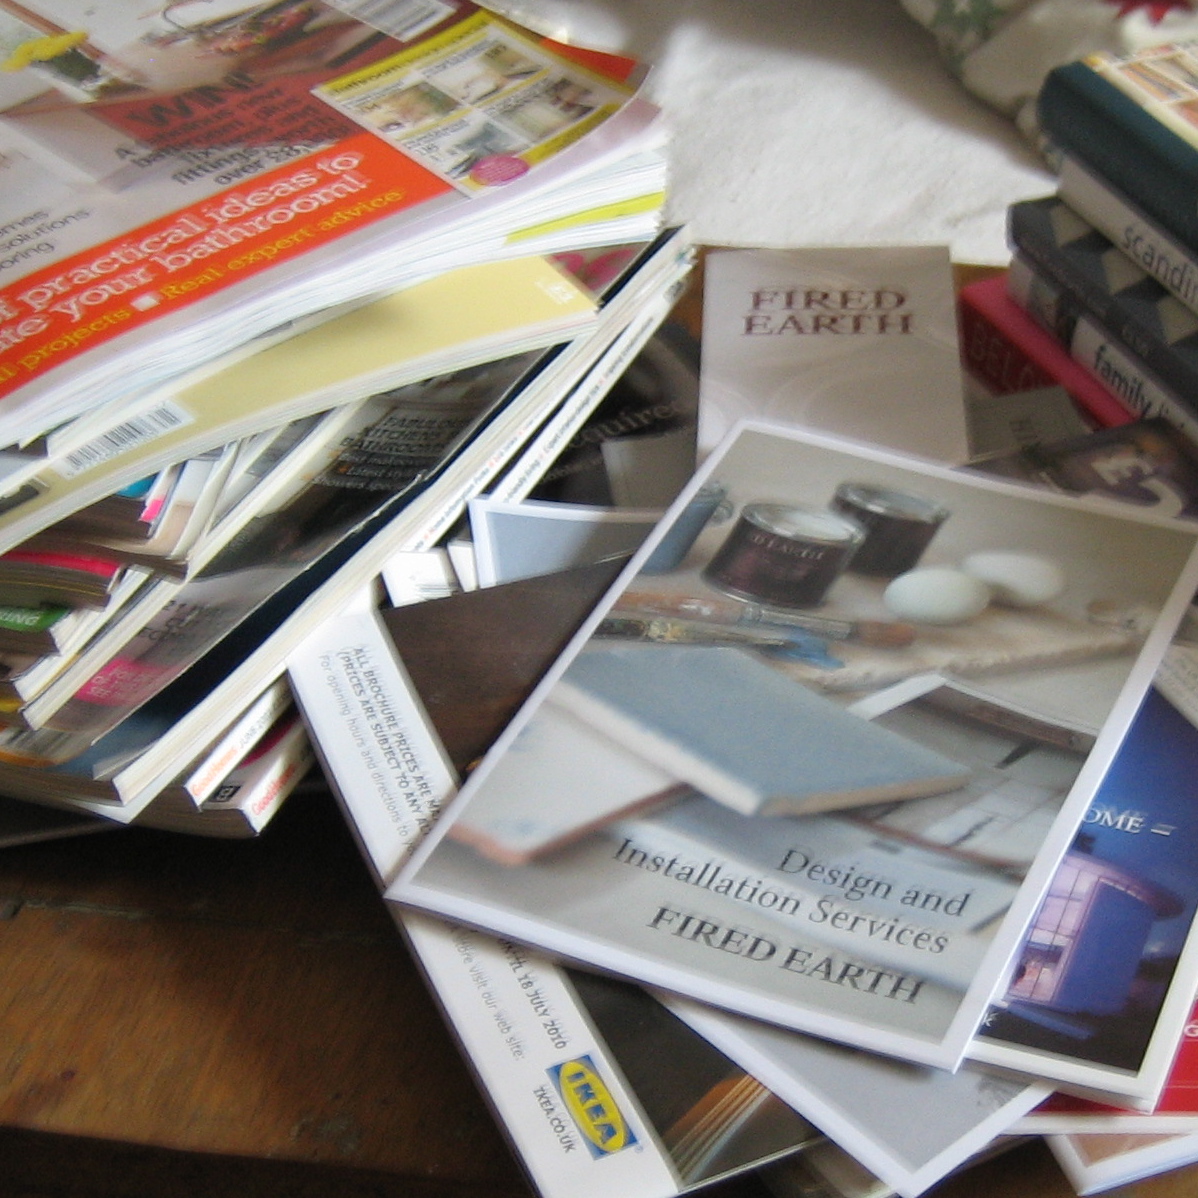 Coffee table overflowing with interior design books and magazines